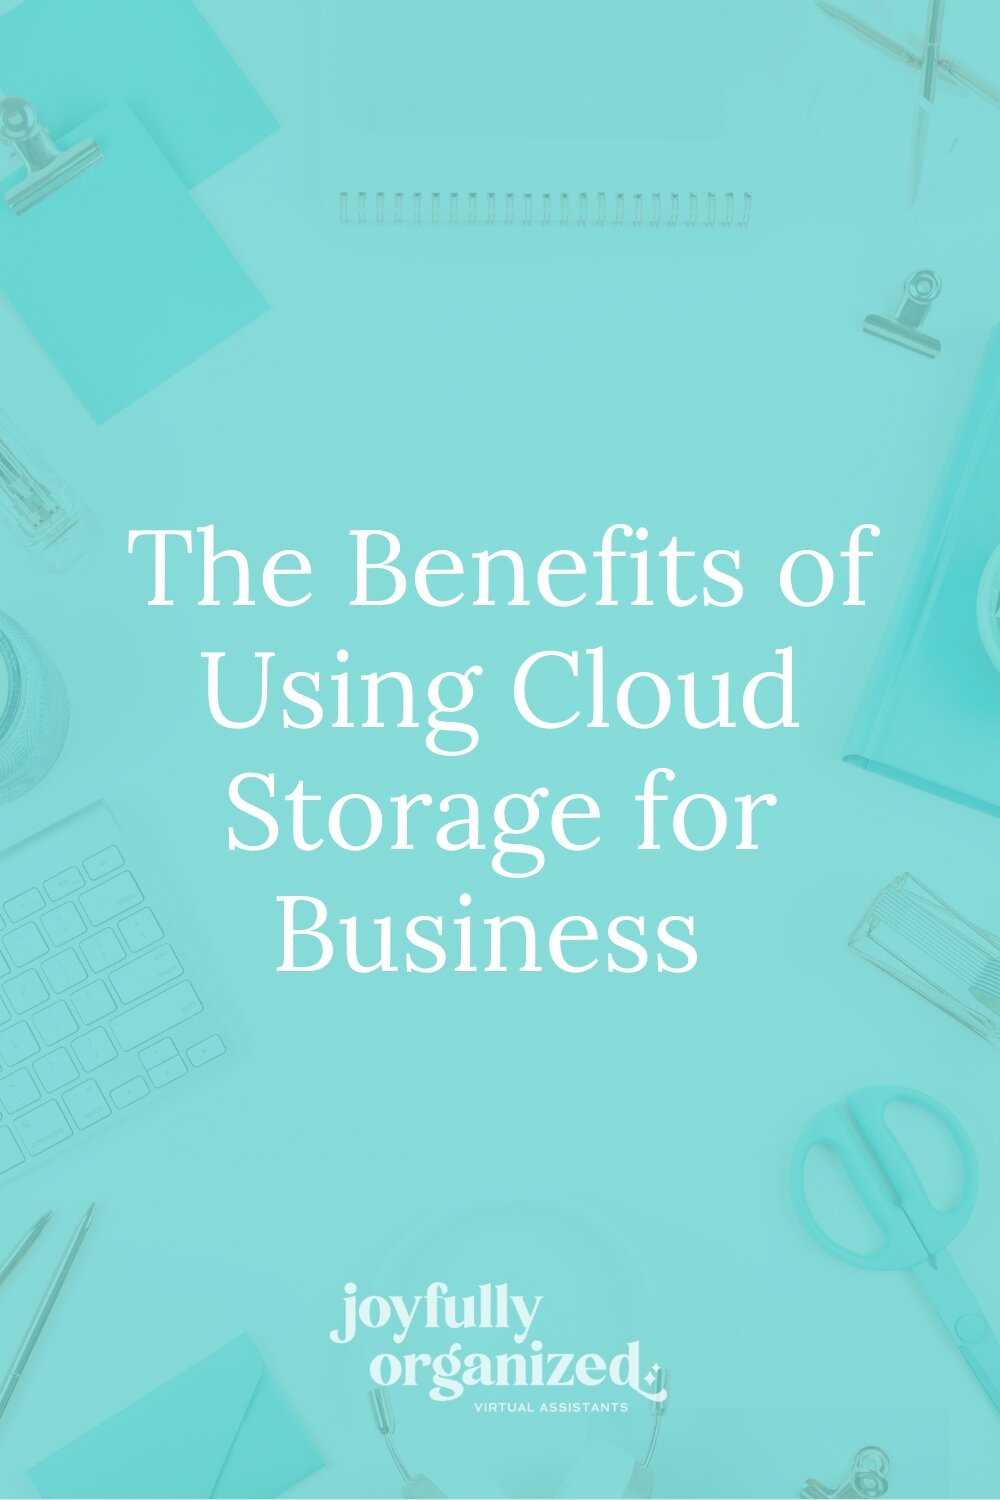 The Benefits of Using Cloud Storage for Business&nbsp;